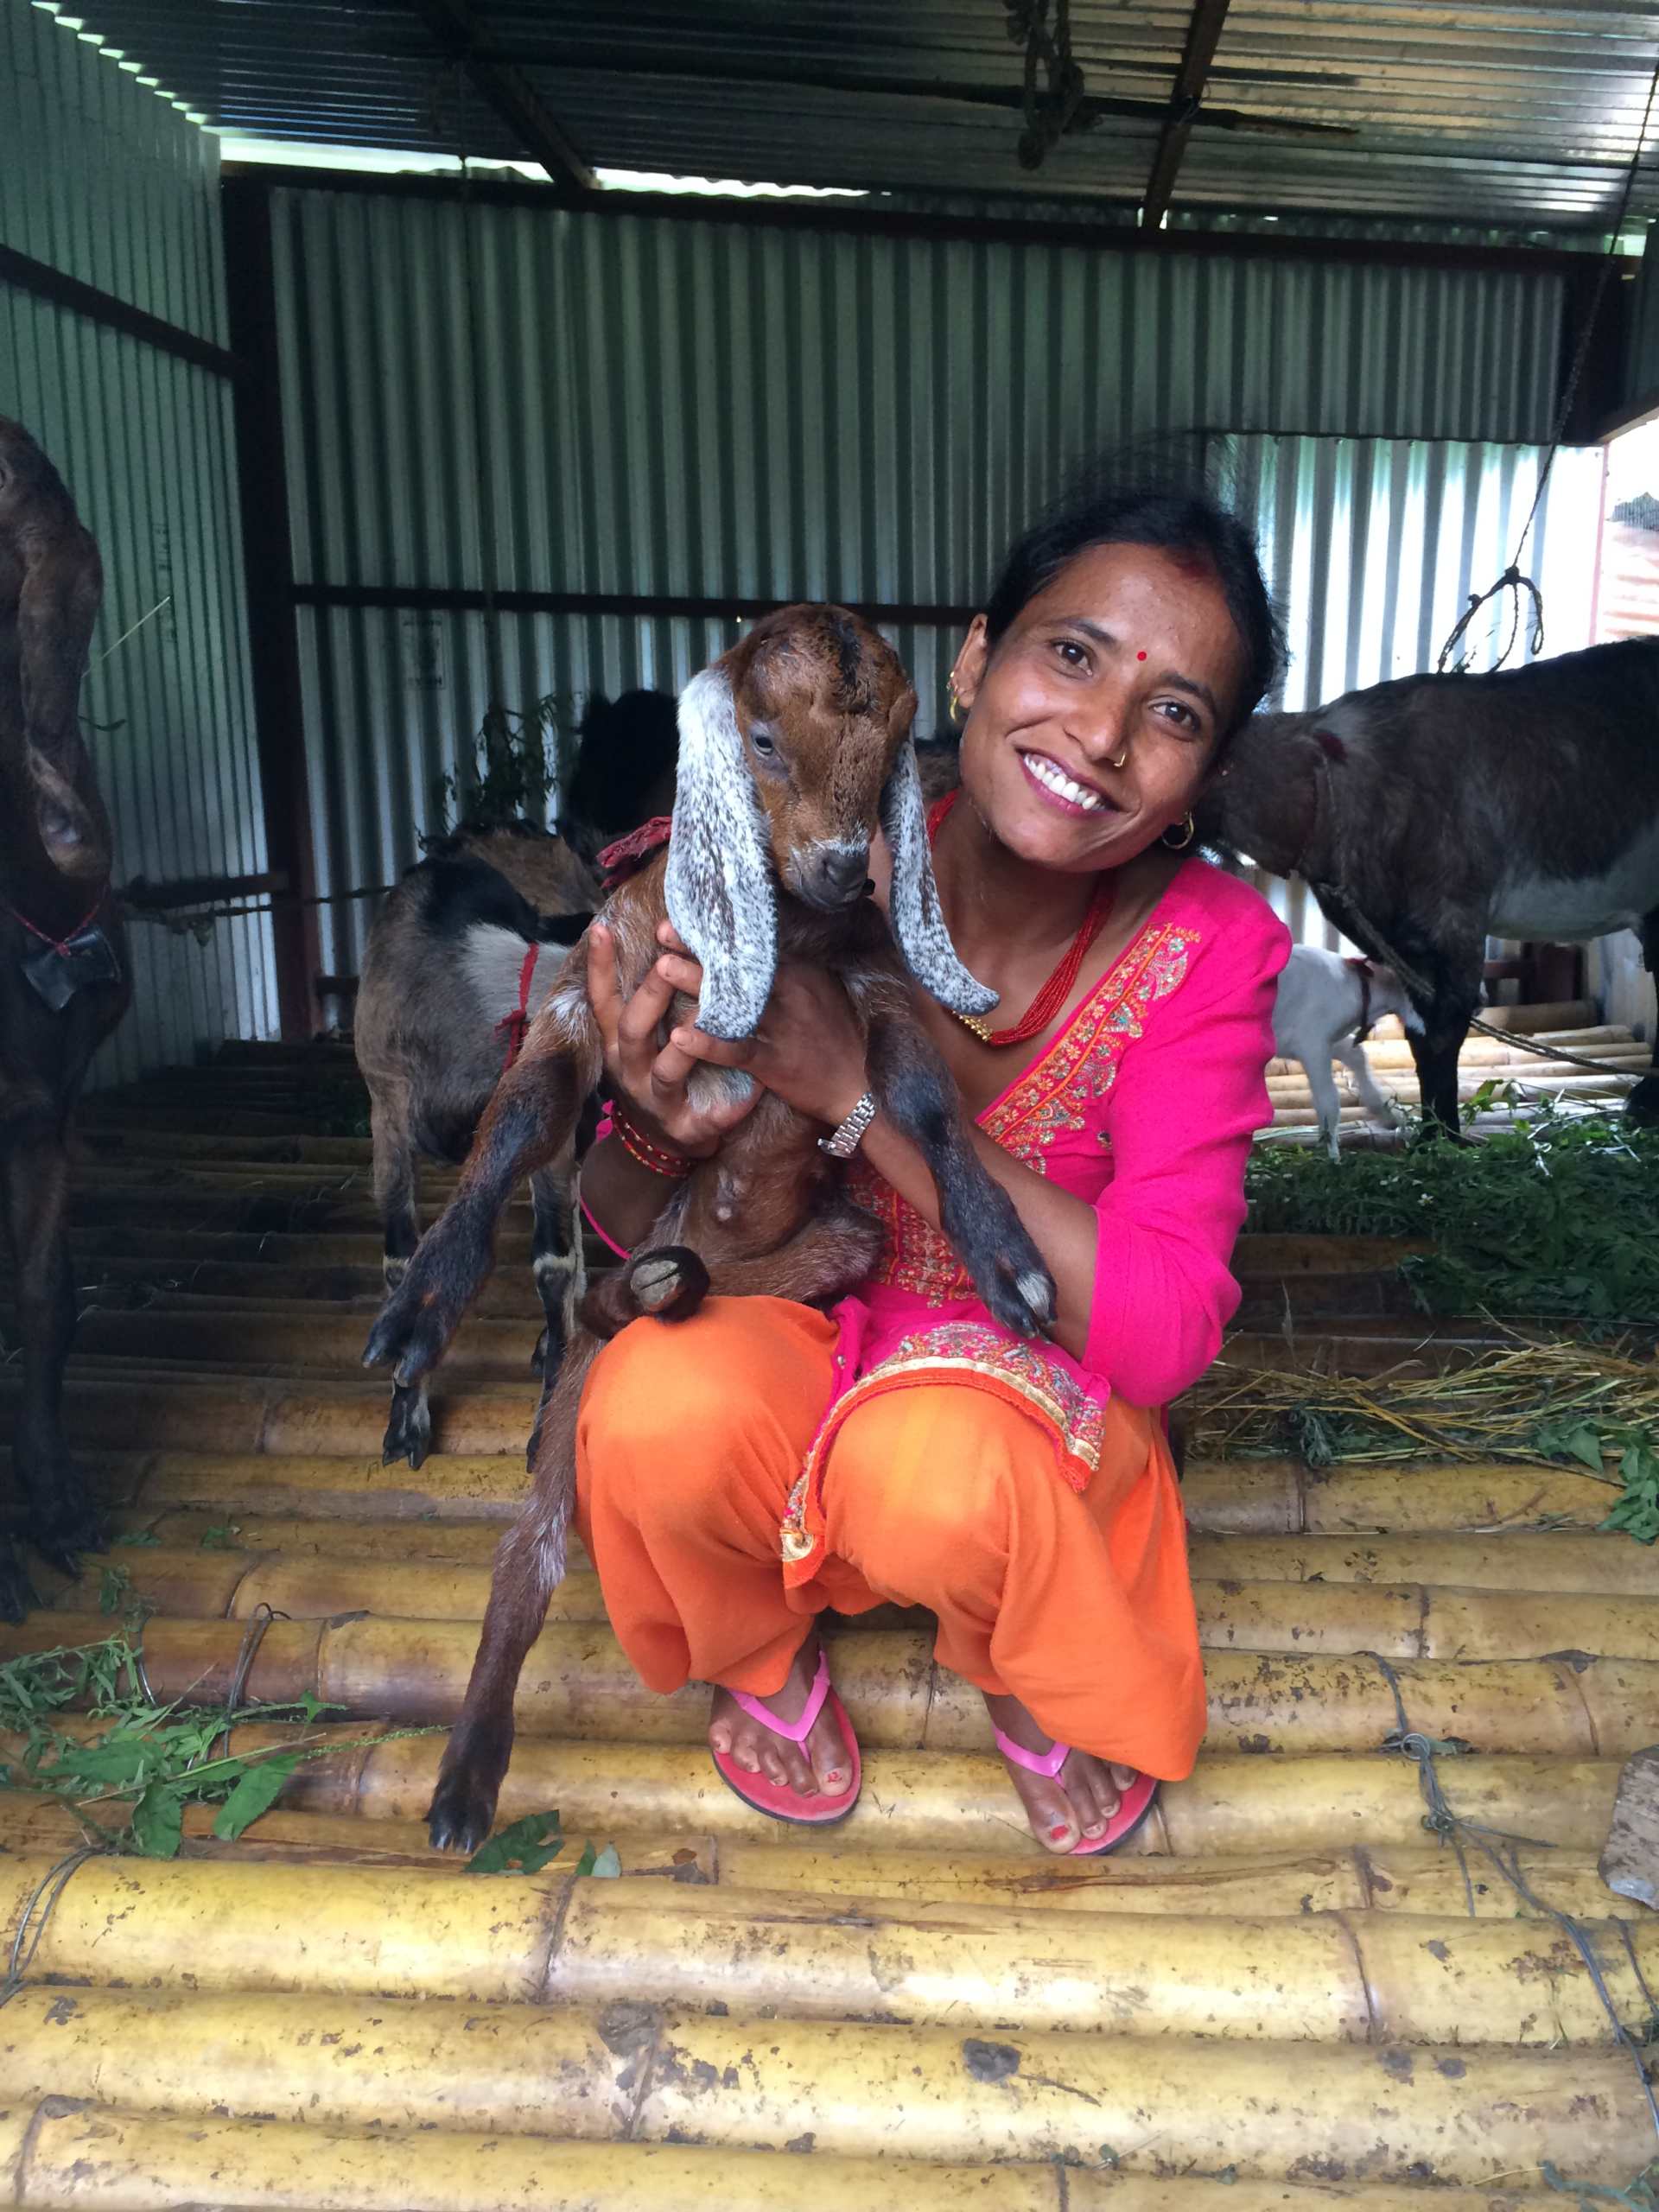 These goats are not only cute but provide people like Maiya with their livelihood.